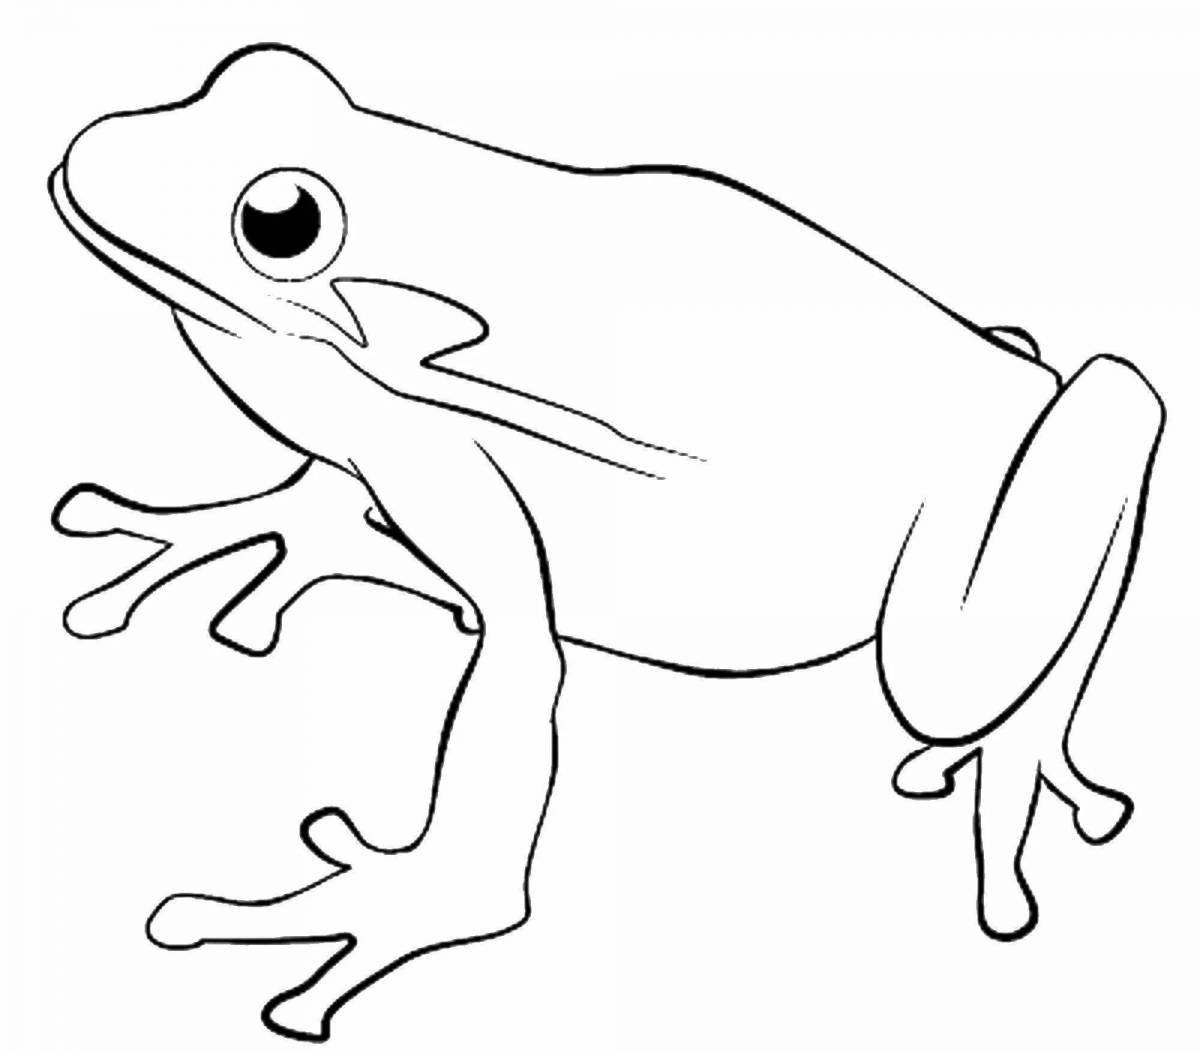 Delightful frog coloring